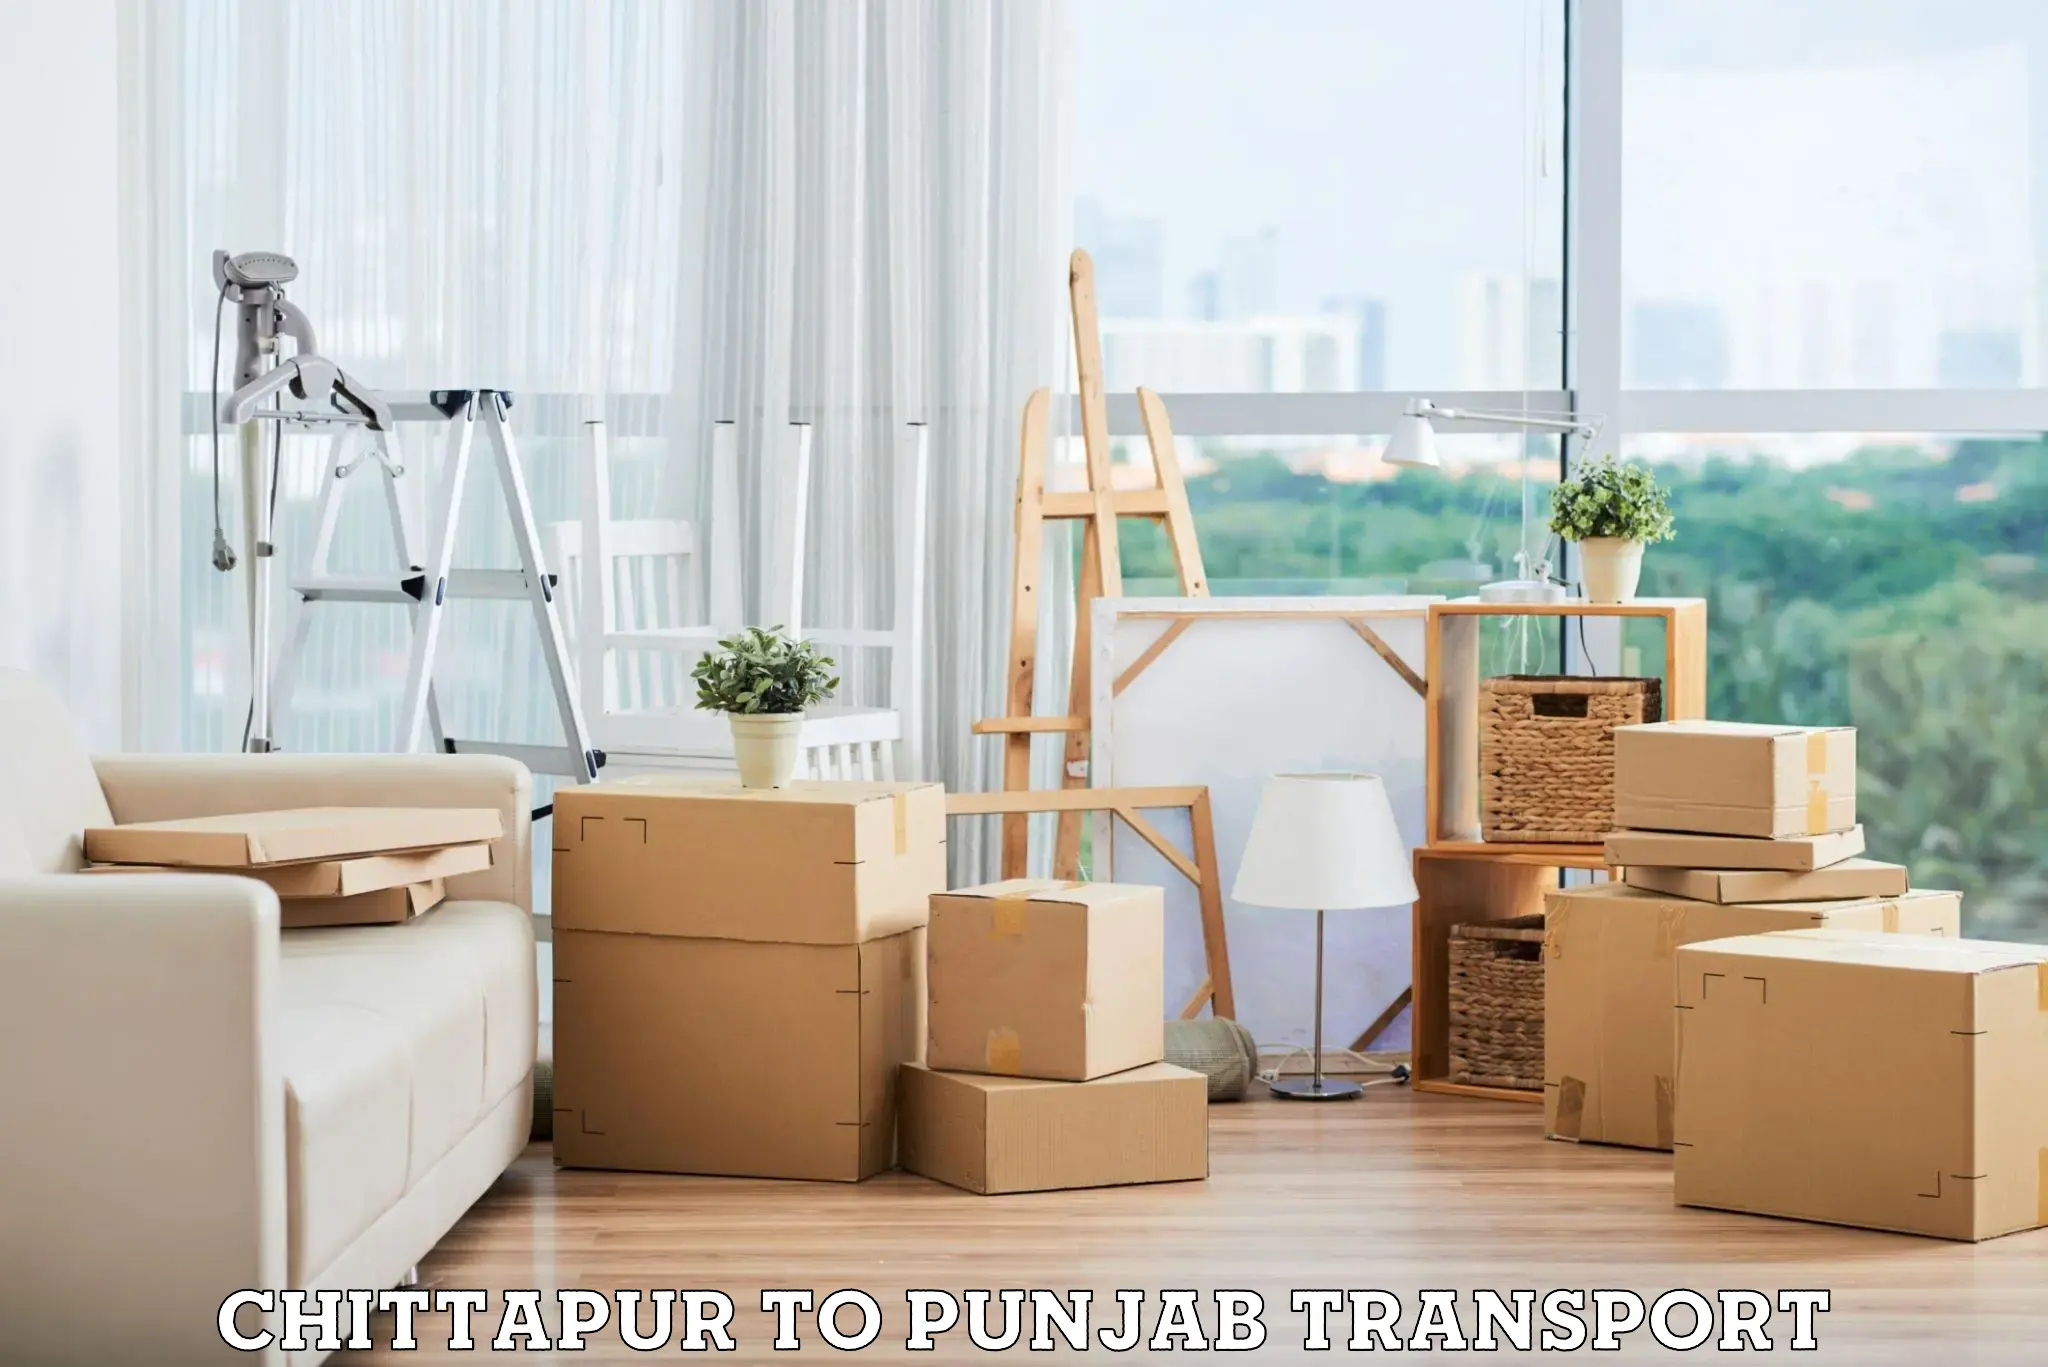 Cargo transport services Chittapur to Mohali